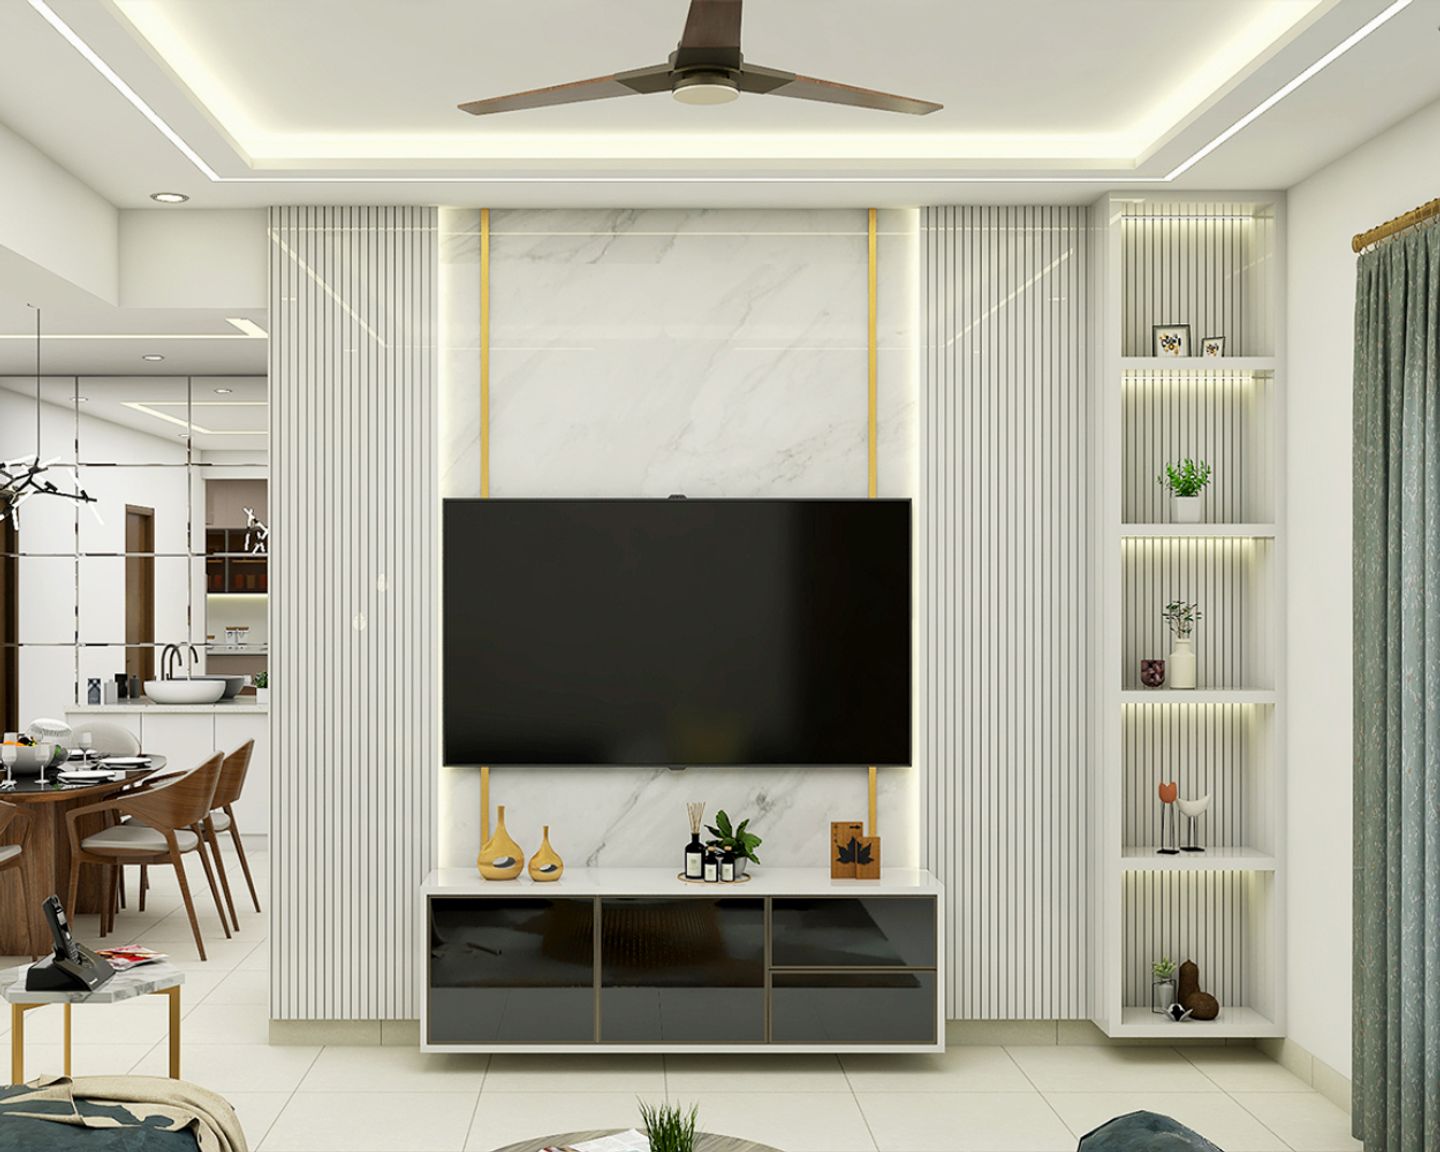 TV Unit Design With White Marble Wall Tile And Fluted Panelling - Livspace